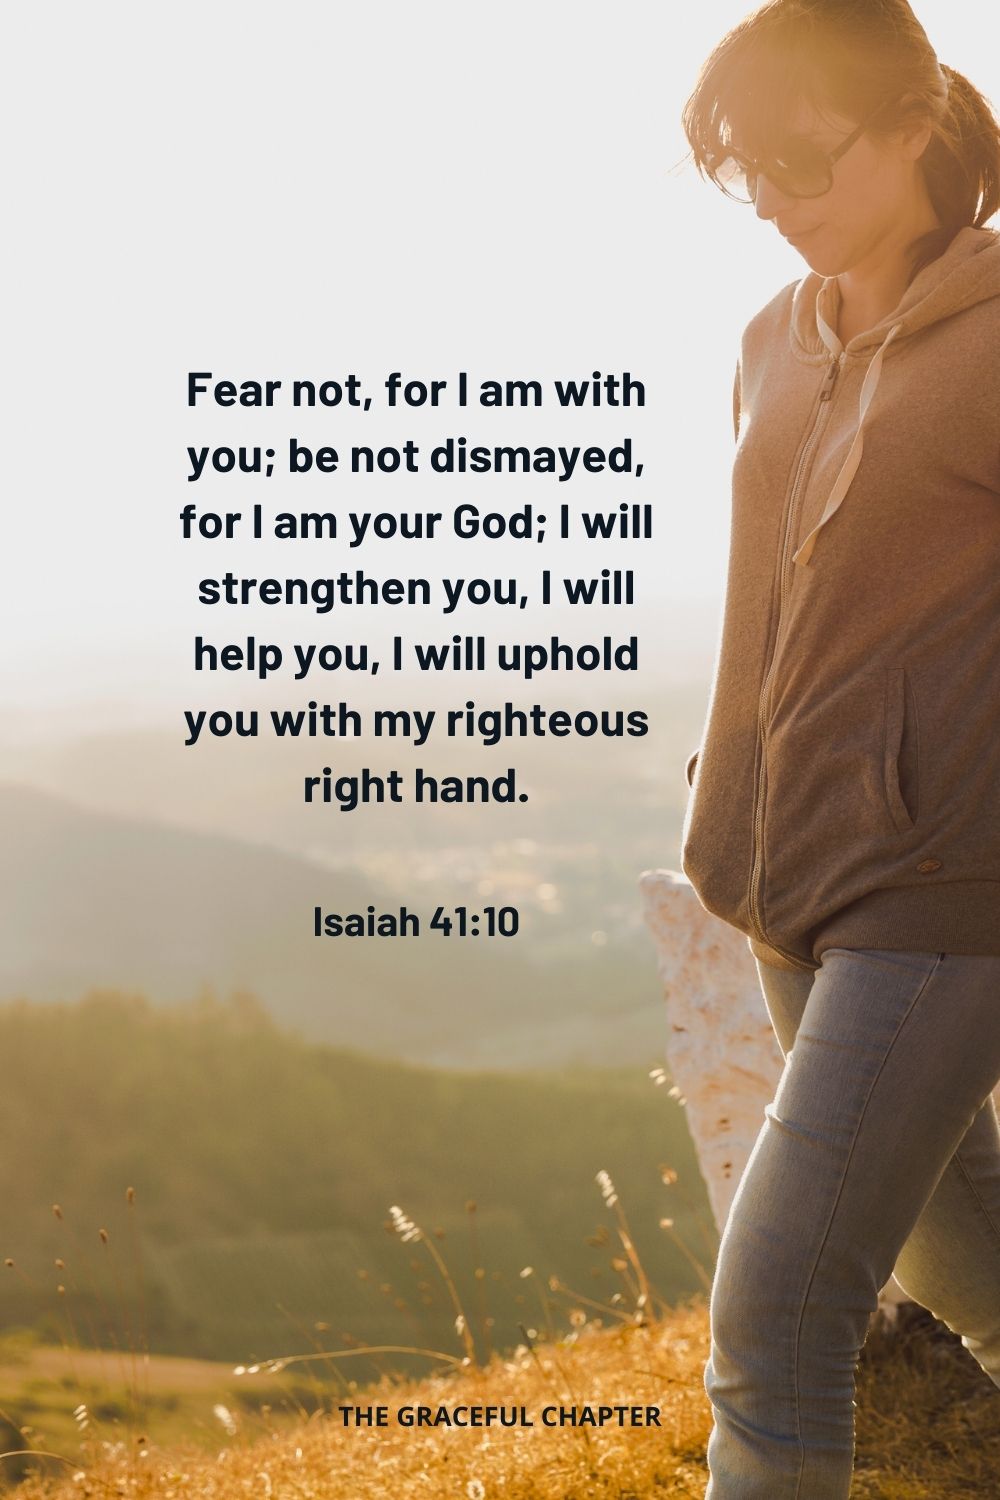 Fear not, for I am with you; be not dismayed, for I am your God; I will strengthen you, I will help you, I will uphold you with my righteous right hand. Isaiah 41:10